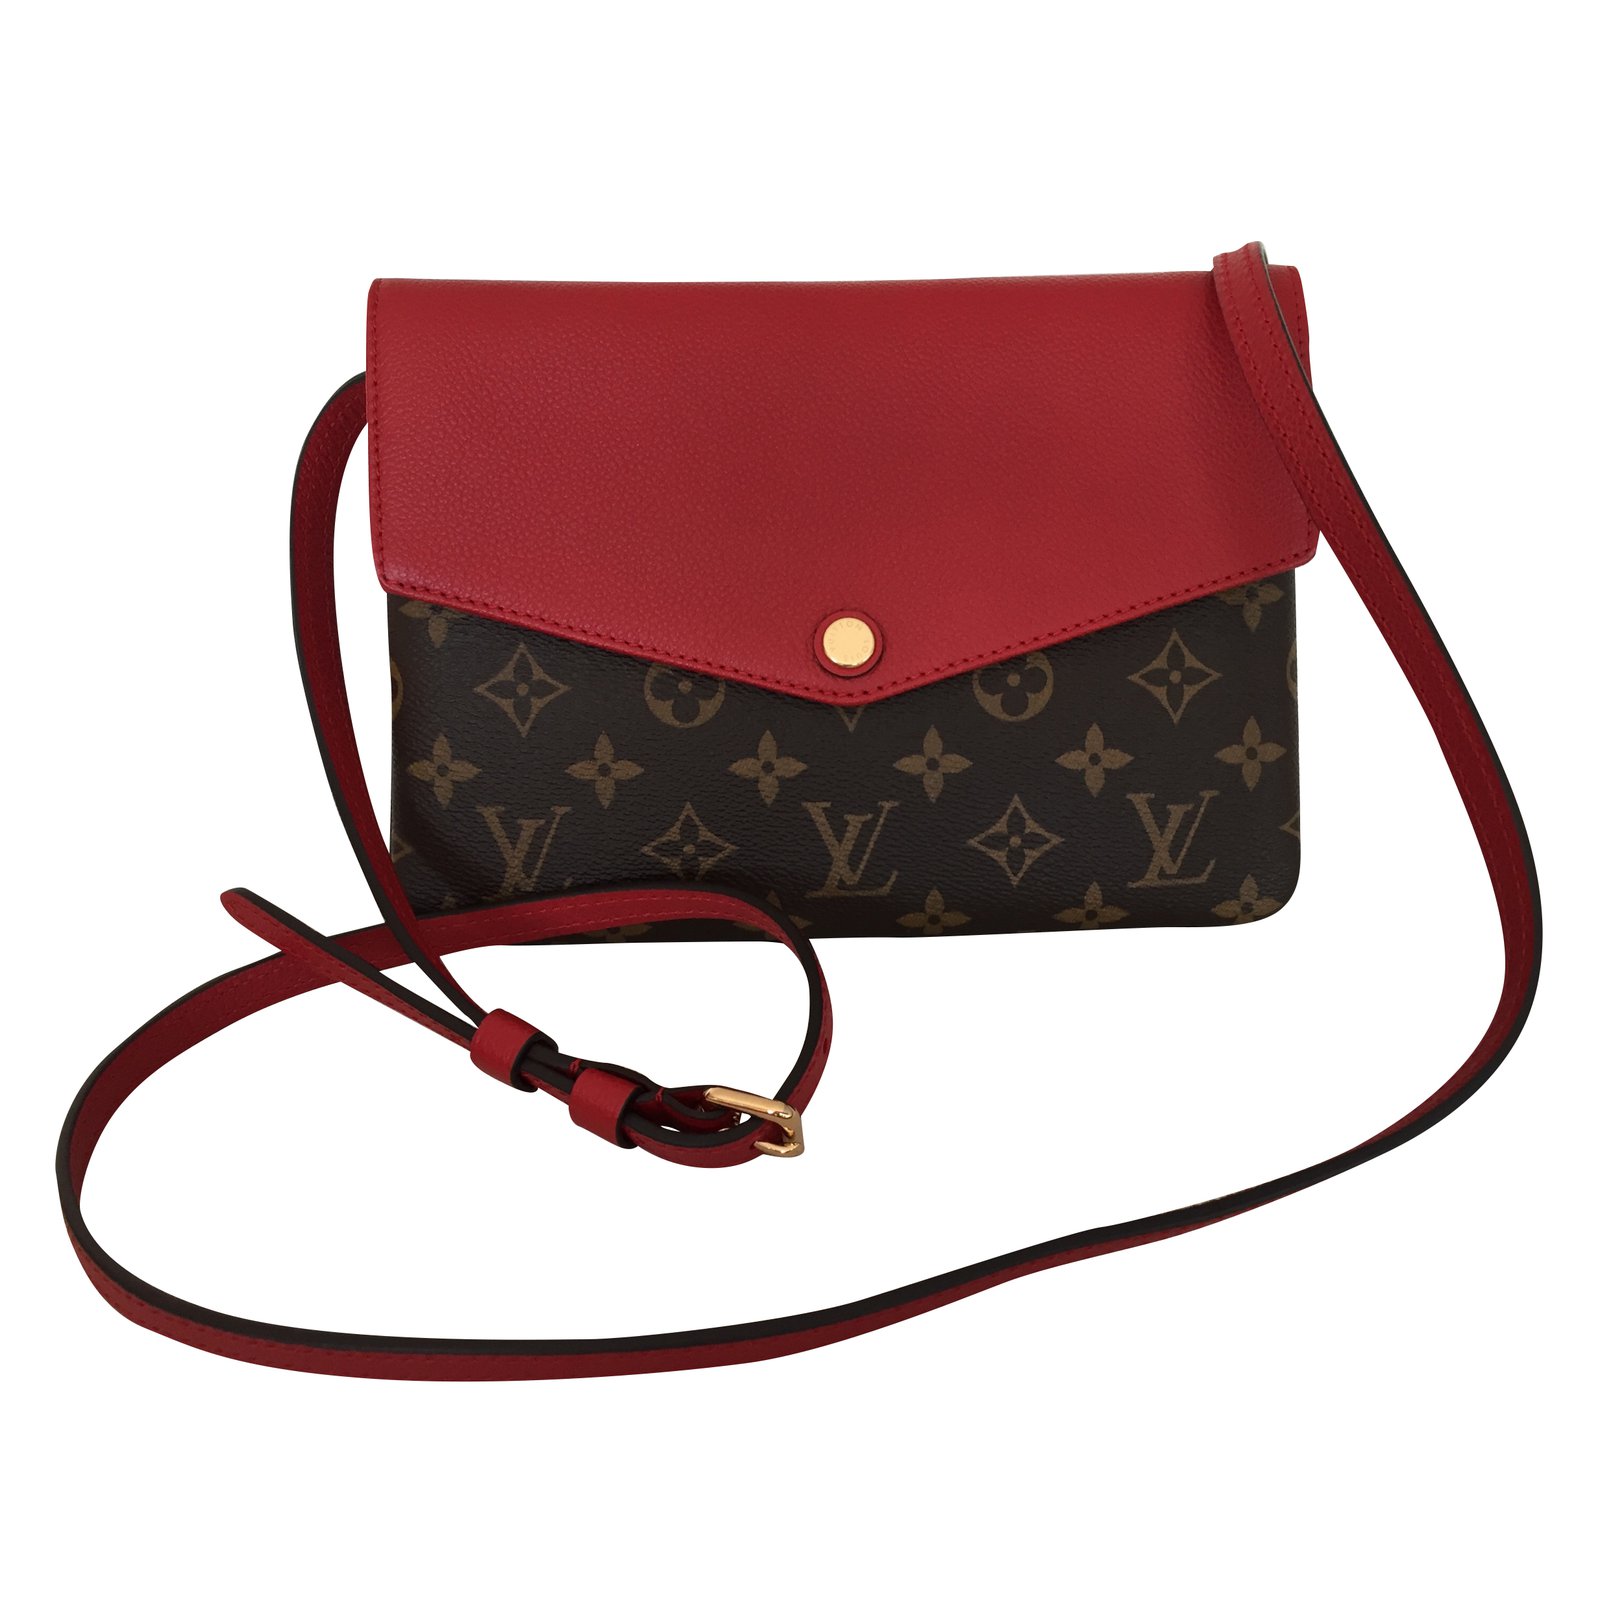 Louis Vuitton Monogram Canvas / Red Leather Twice/Twinset